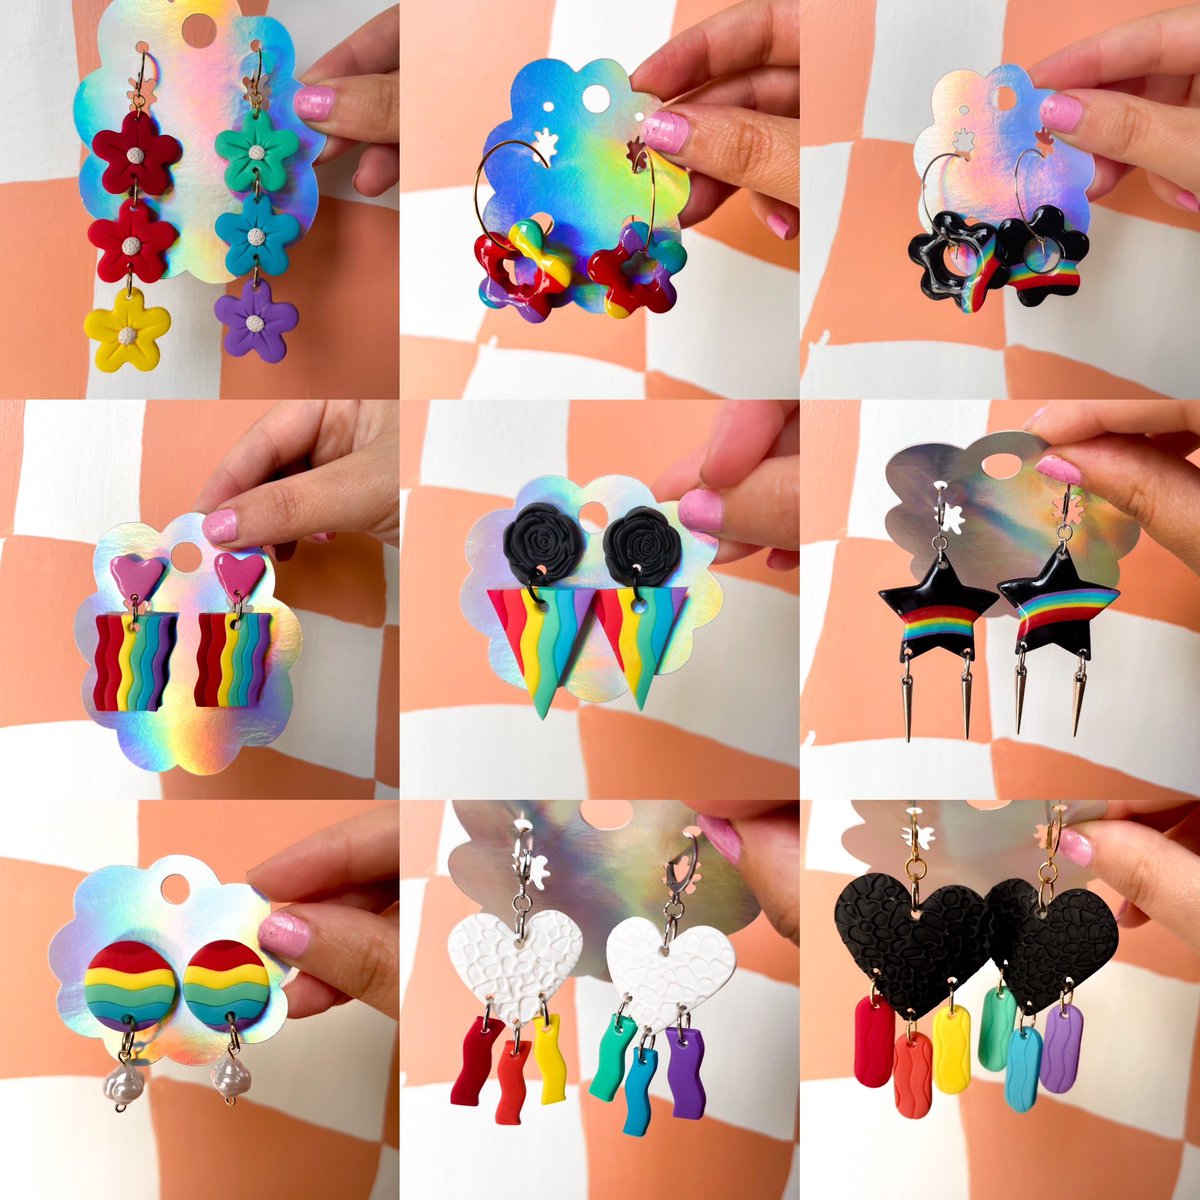 Pride Collection is ready to go! 
#smallshop #pride #Pride2023 #pridemonth #lgbtqcommunity #earrings #jewelry #handmade